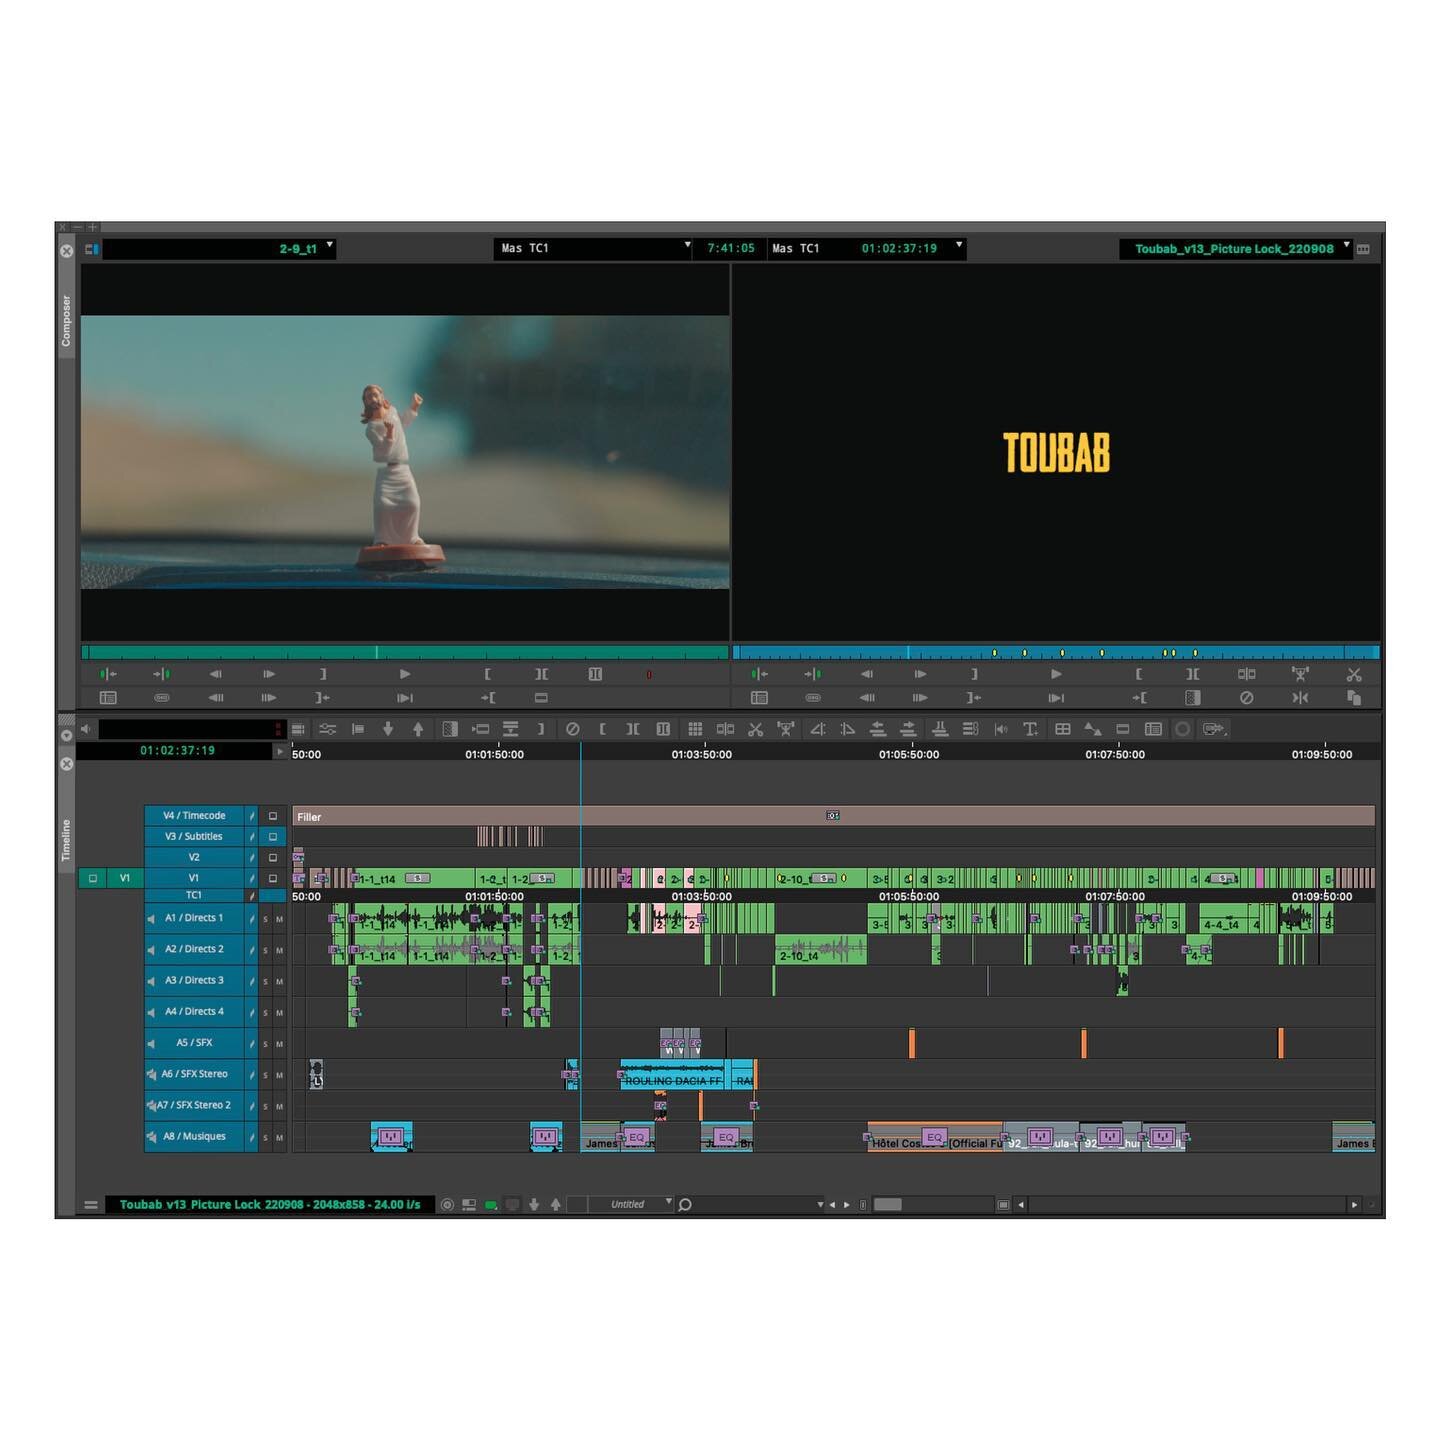 Picture Lock &quot;Toubab&quot;
Directed by Marie-Camille Loutan &amp; Valentine Coral
@live_your_emotion @tipimages_productions 
.
.
.
#timeline #avidmediacomposer @avid.mediacomposer #filmediting #film #movie #switzerland